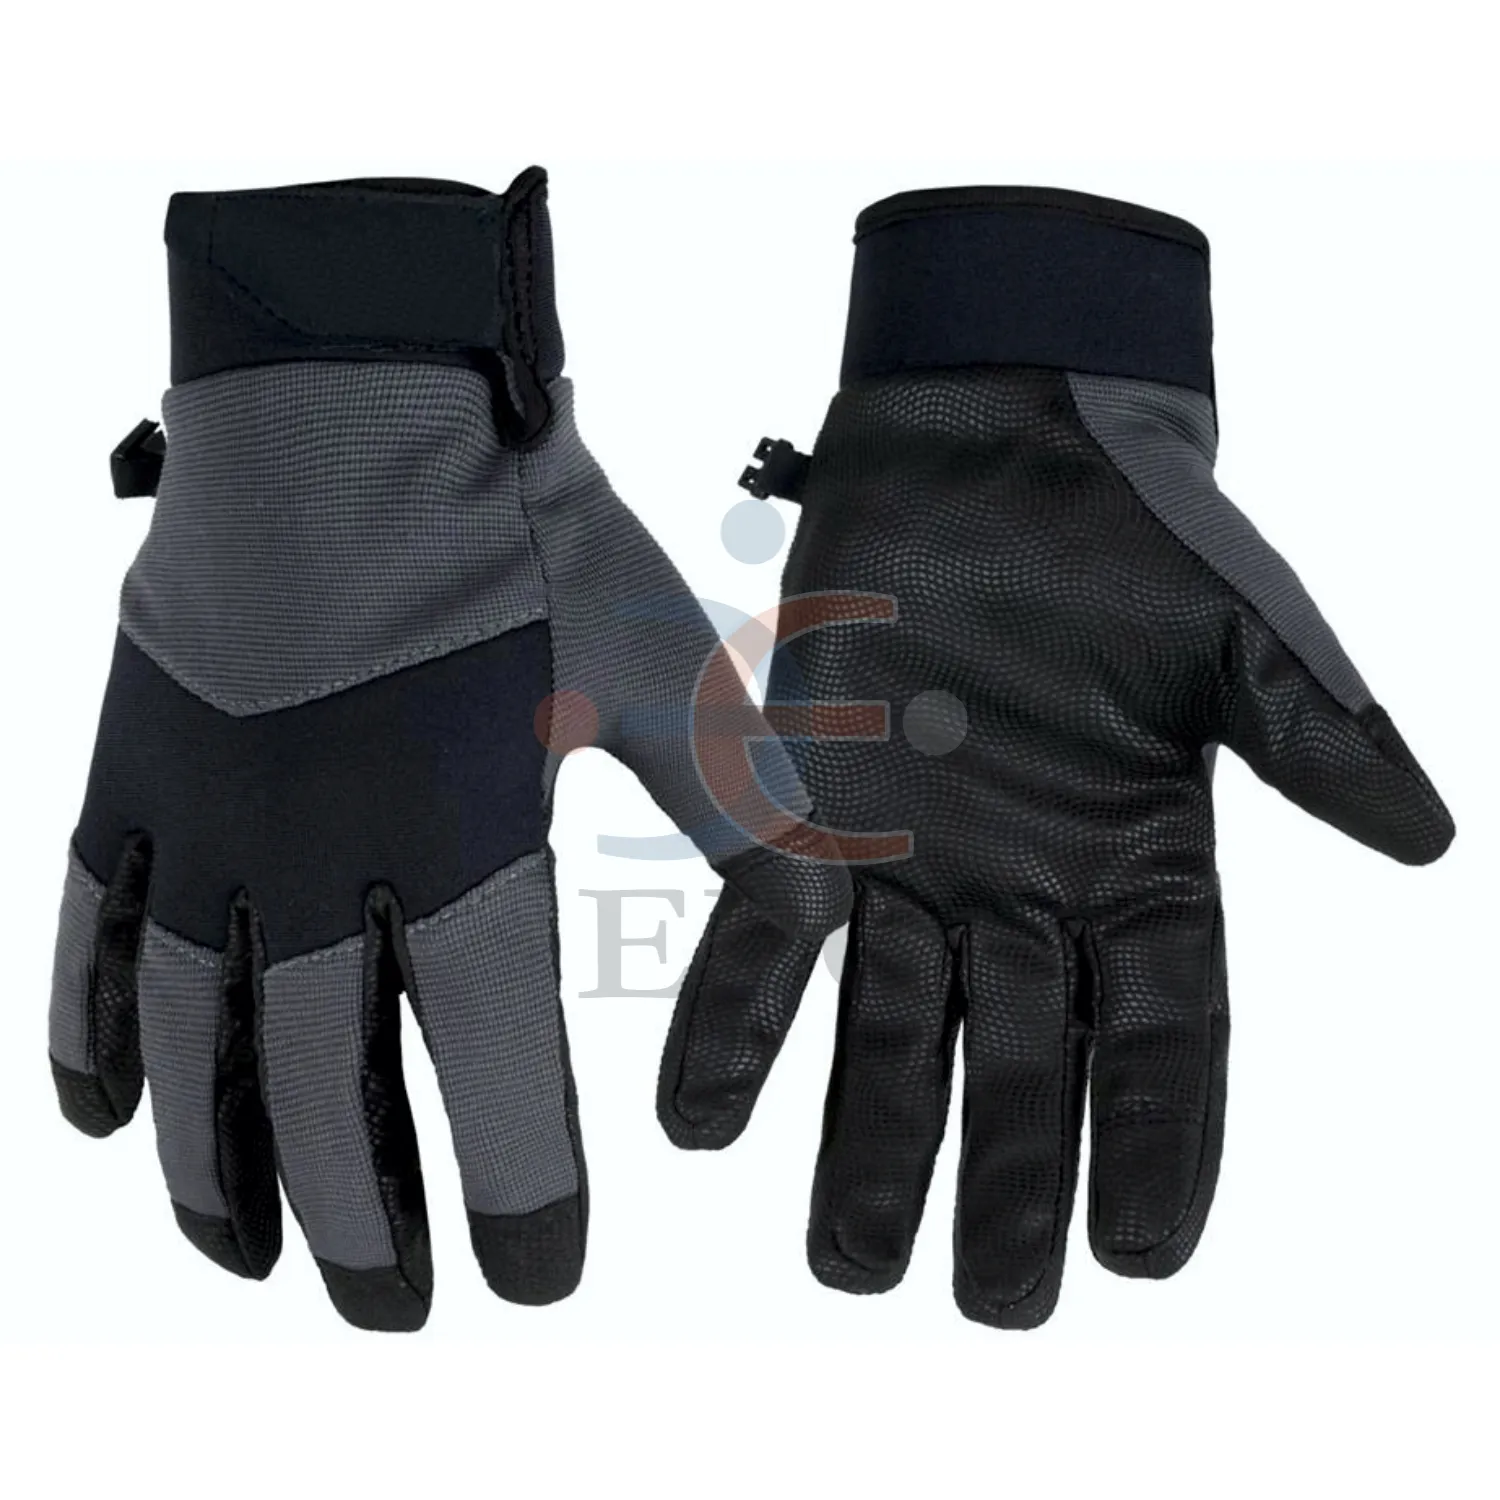 HLI Special Fast Roping / Rappelling Gloves OEM Tactical Rappel / Fast Rope Gloves Thick Full-grain Leather Gloves from Pakistan